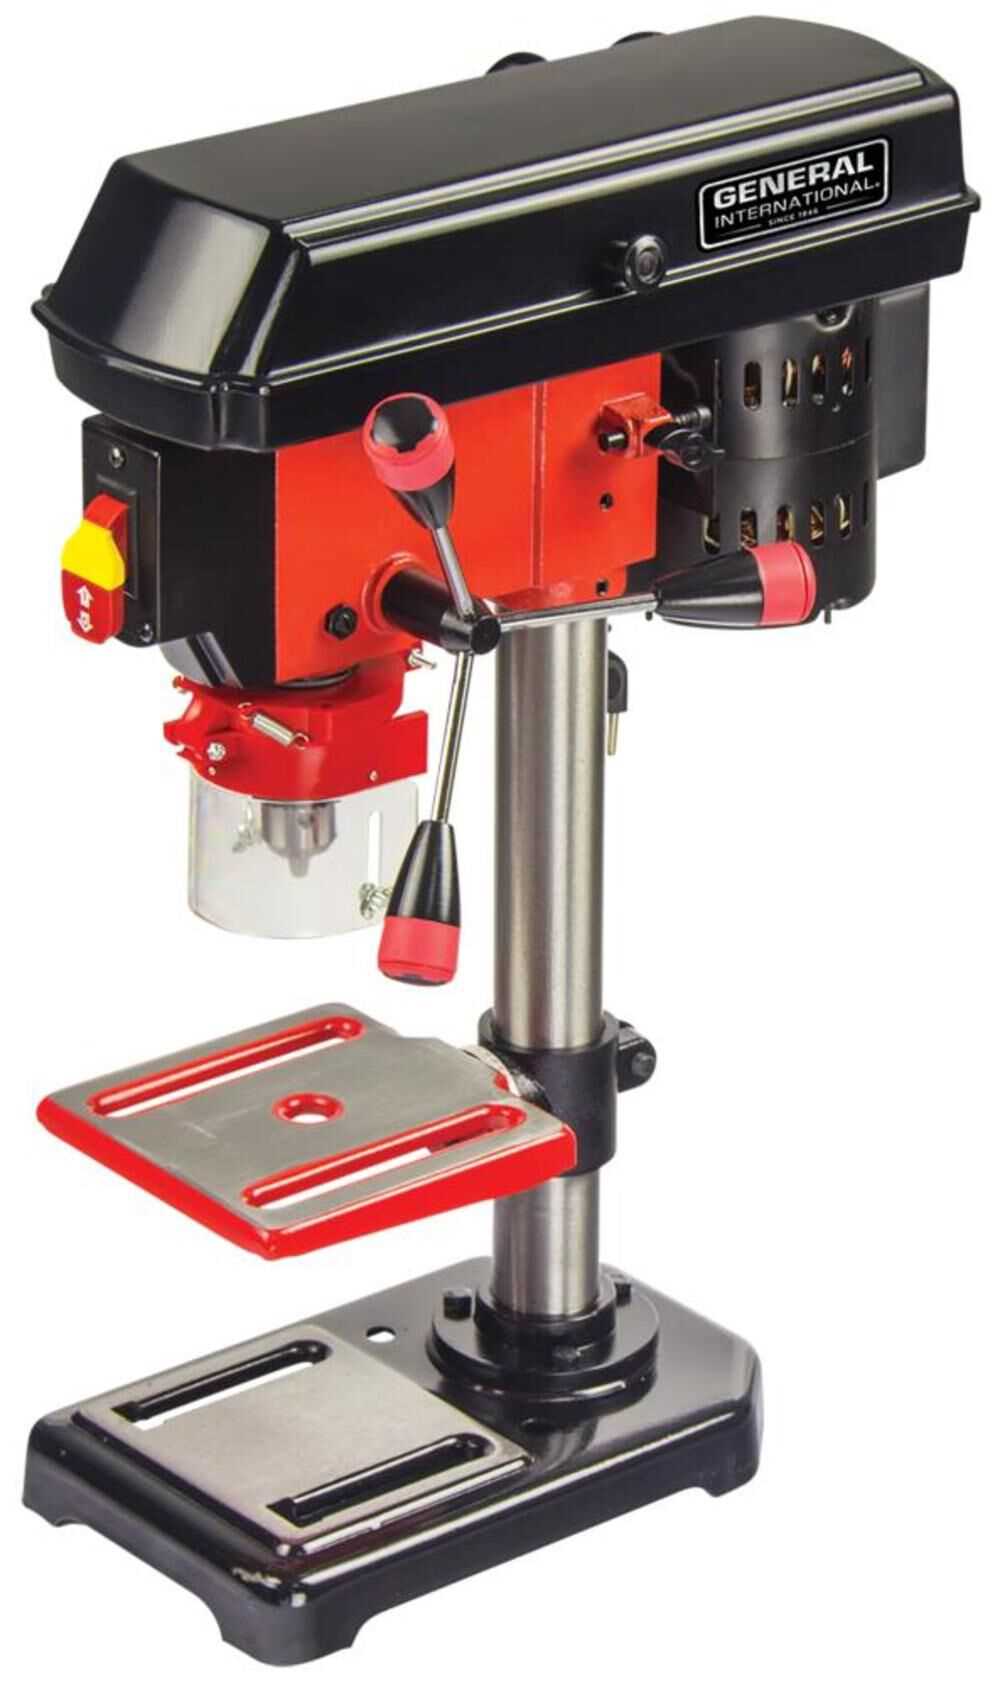 Drill Press Laser: Myths and Reality